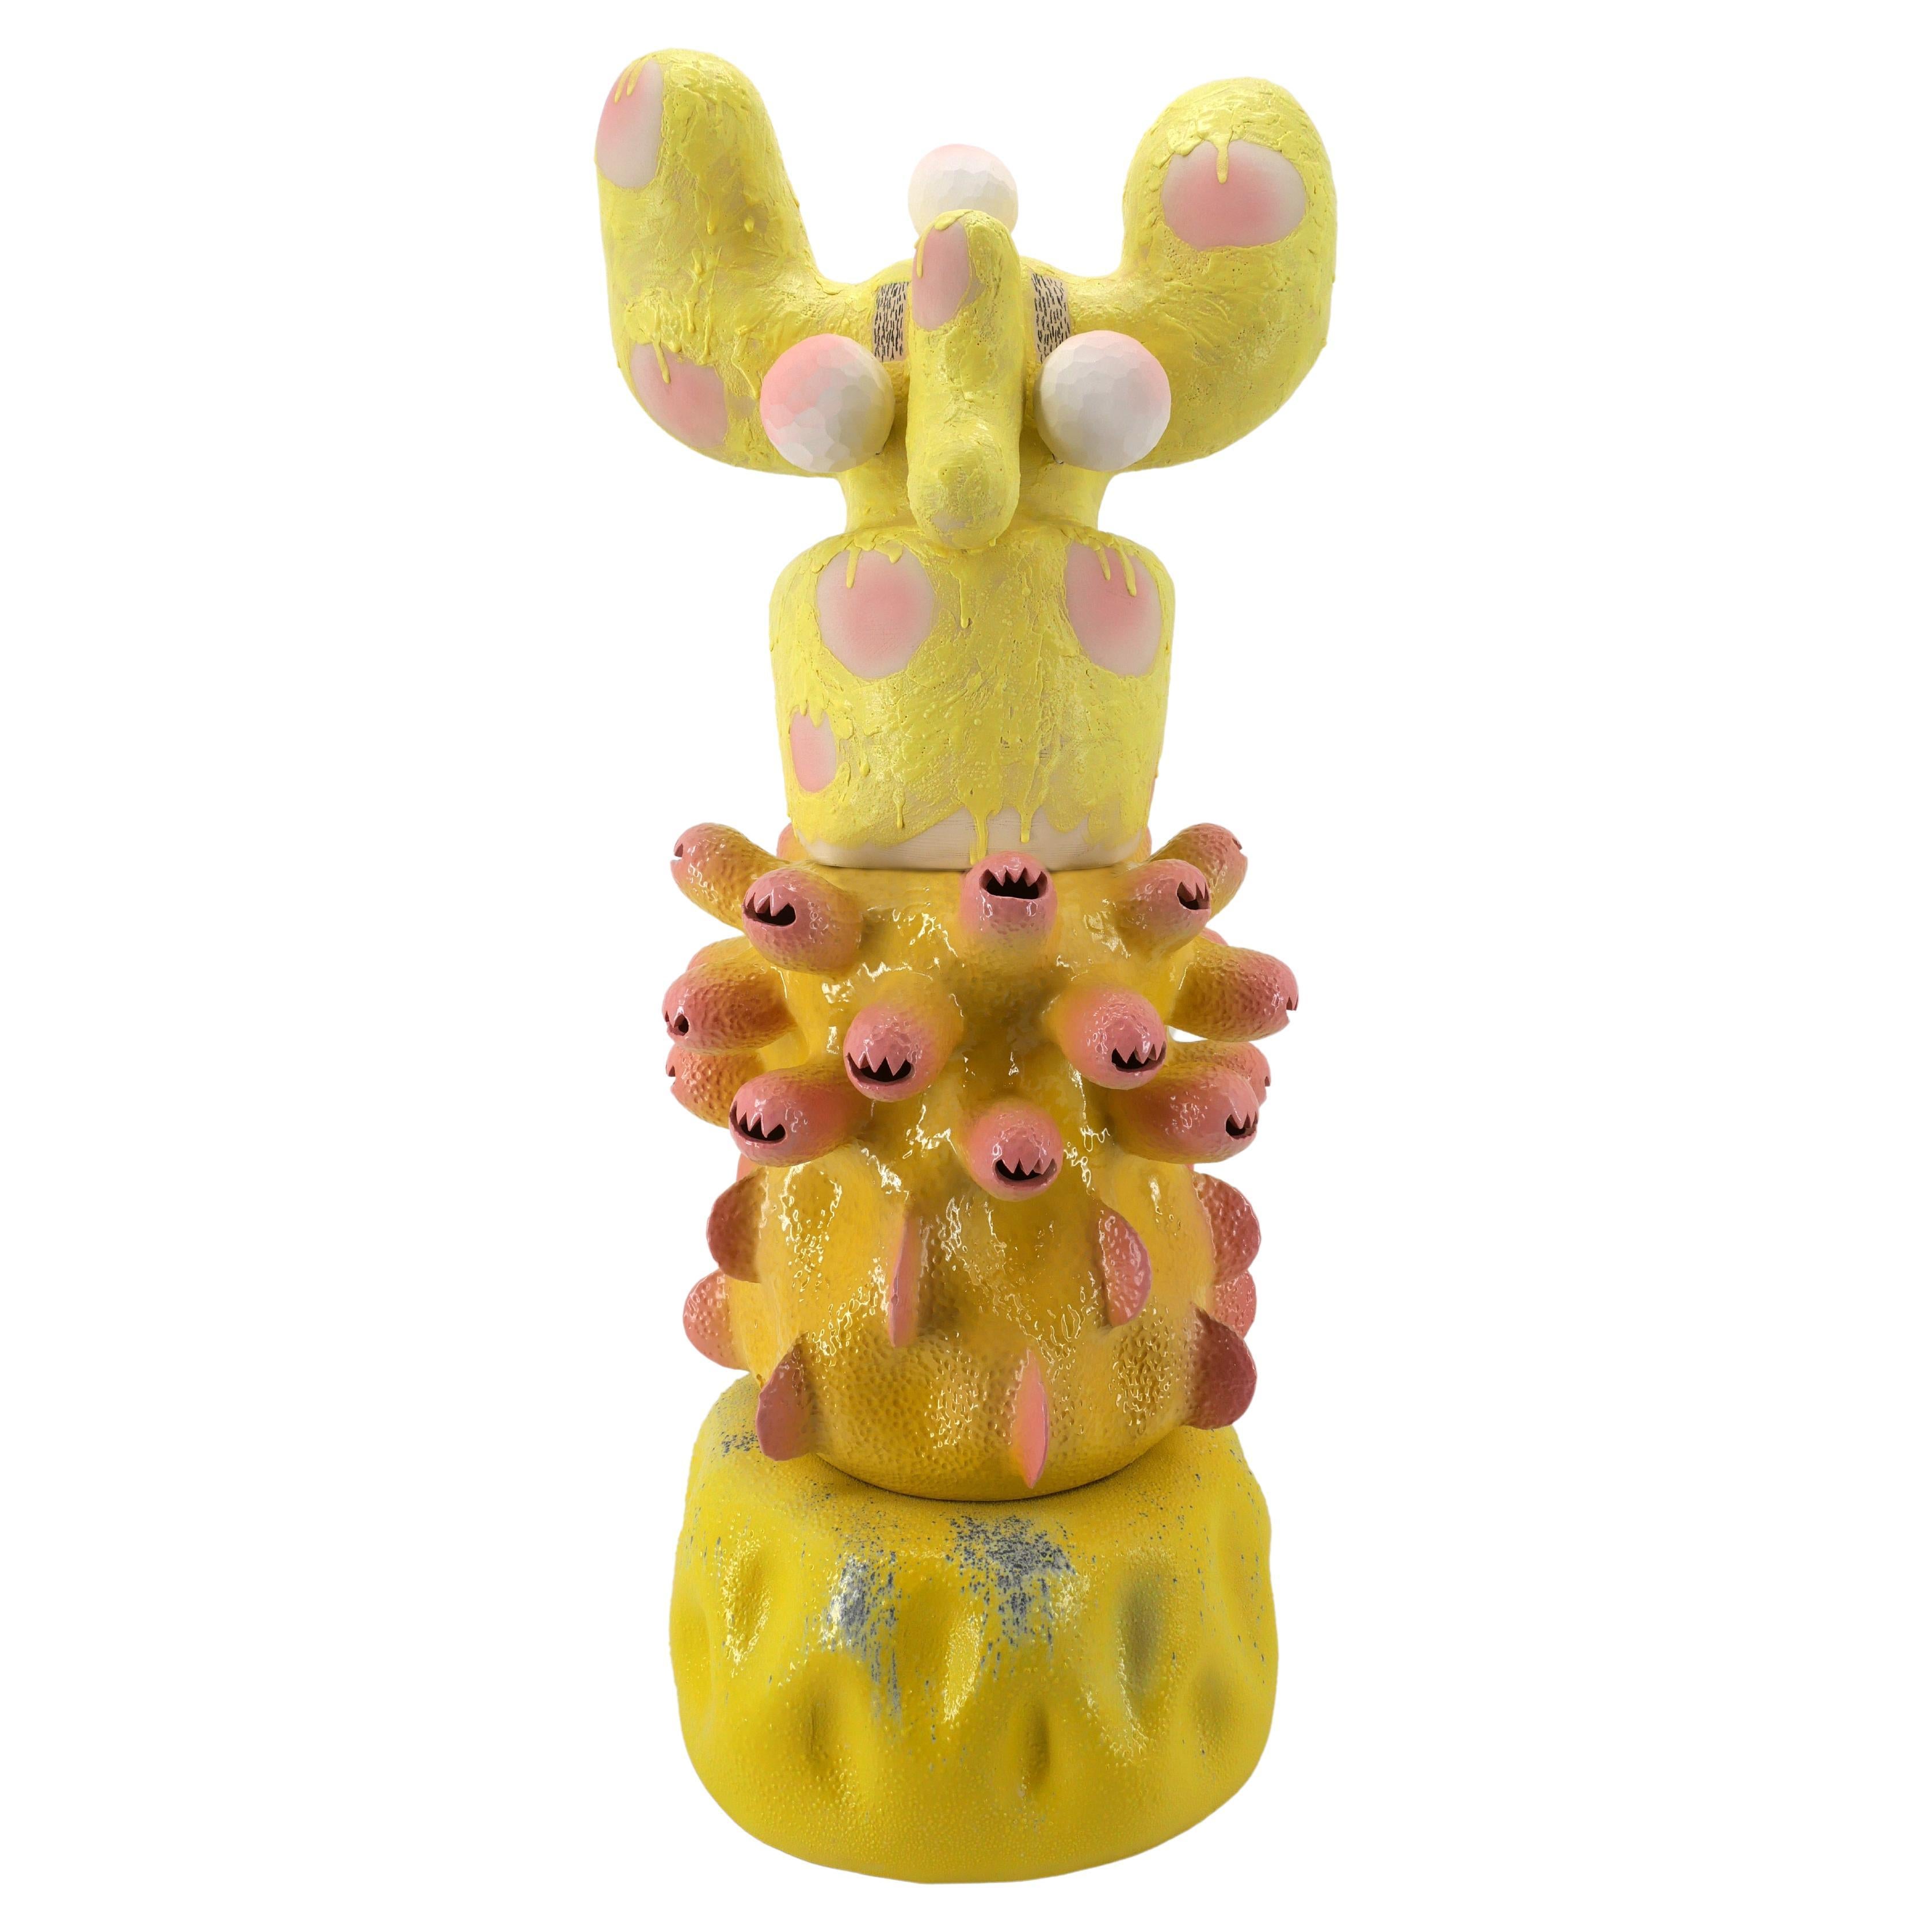 'Banana Eats You' Playful Monster Ceramic Decorative Sculpture by Kartini Thomas For Sale